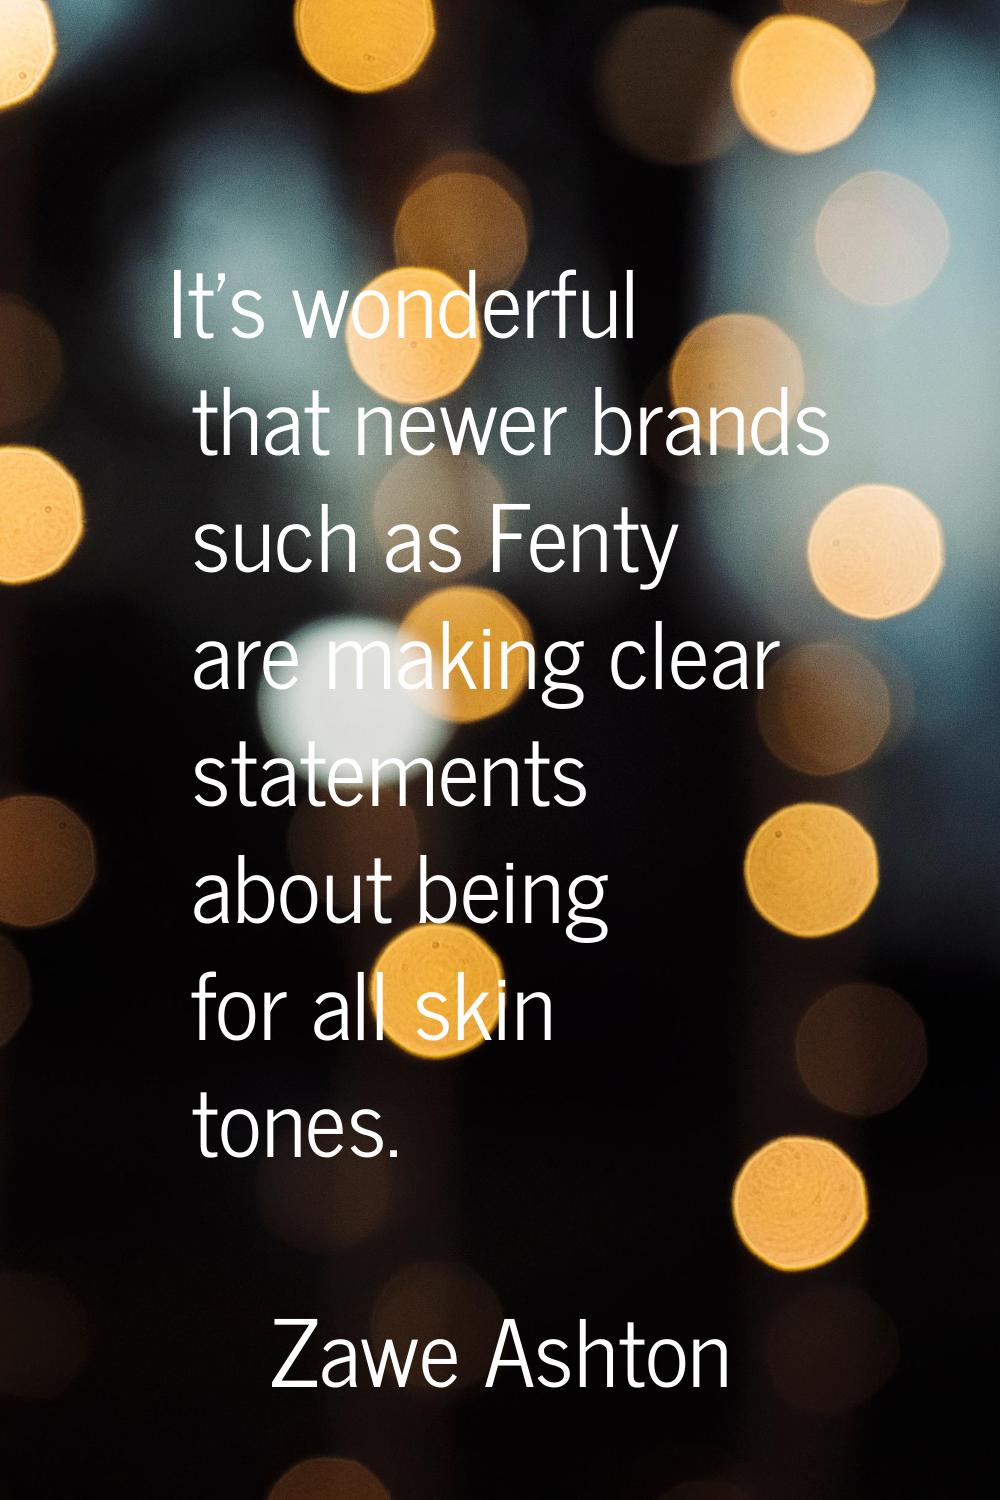 It's wonderful that newer brands such as Fenty are making clear statements about being for all skin